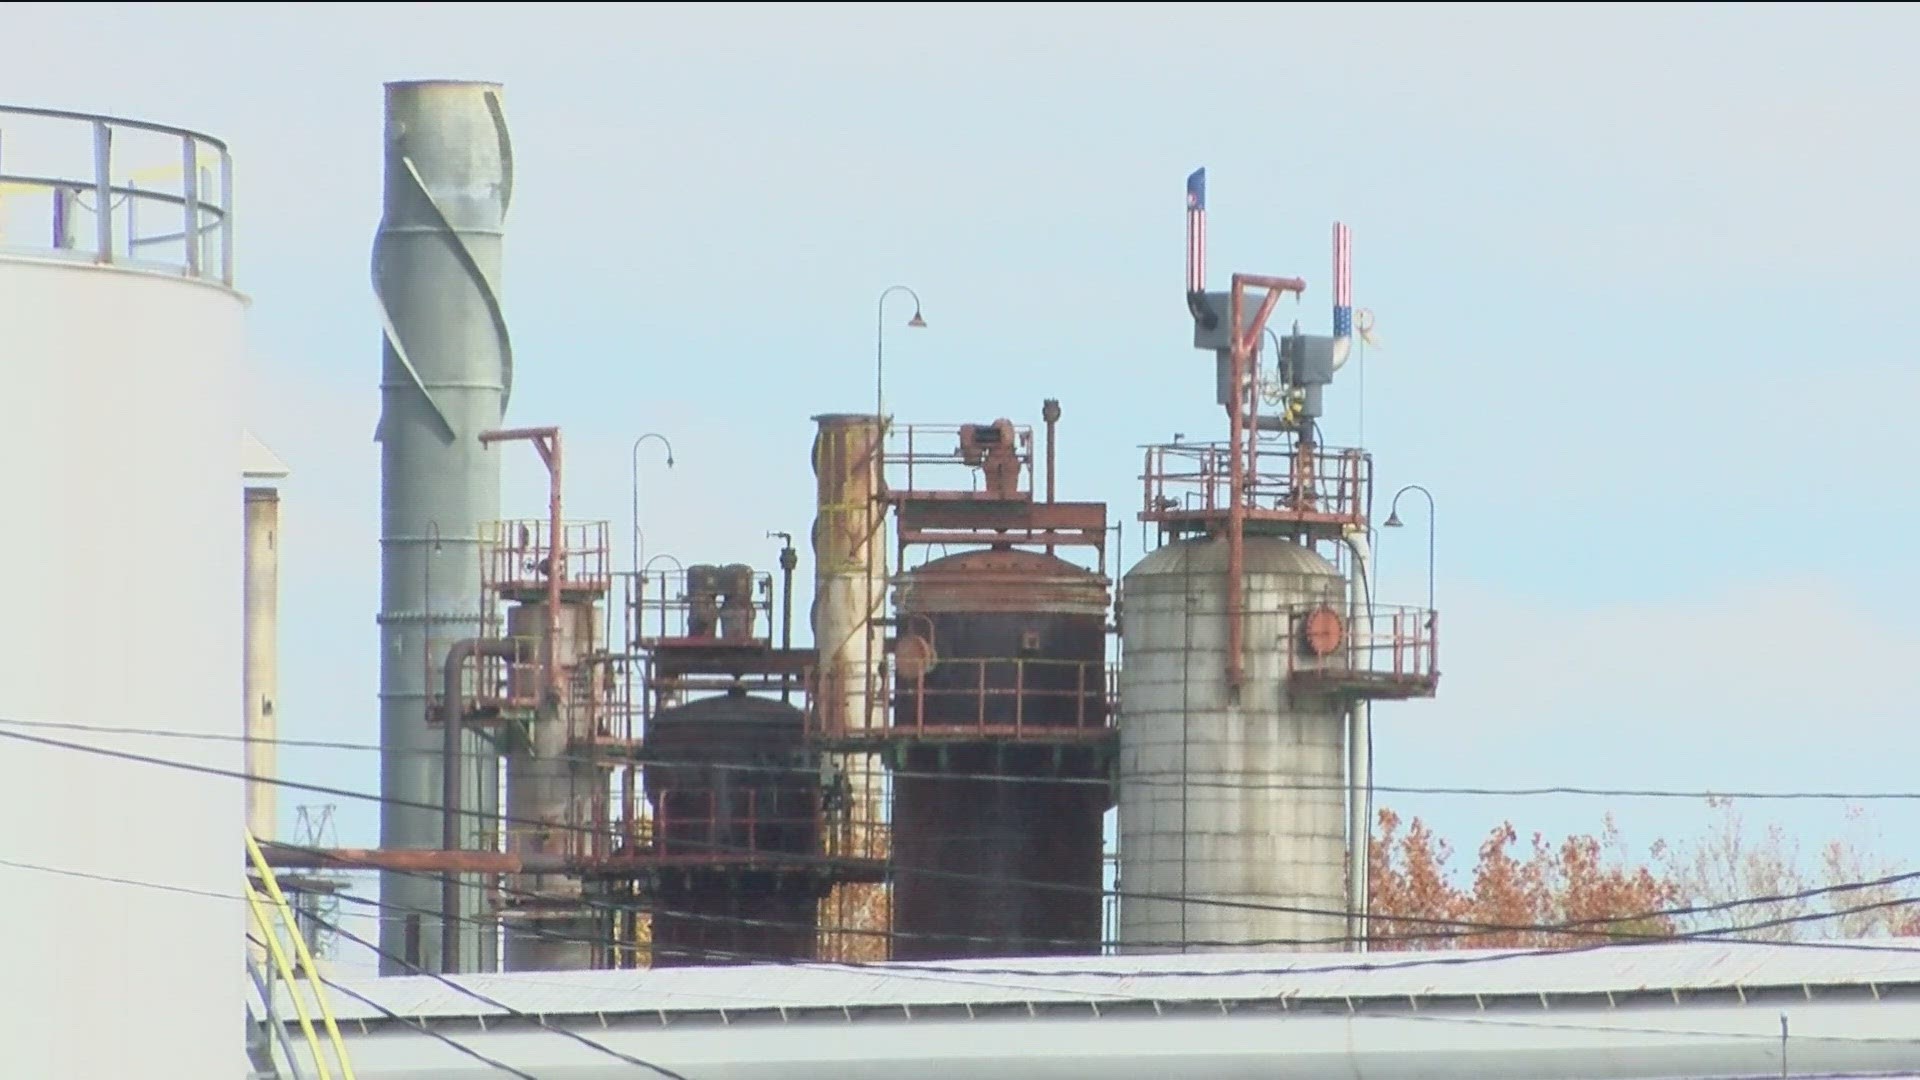 The refining company said they would "do everything possible to eliminate odors" but there is a chance the work might generate a natural gas smell for a short time.